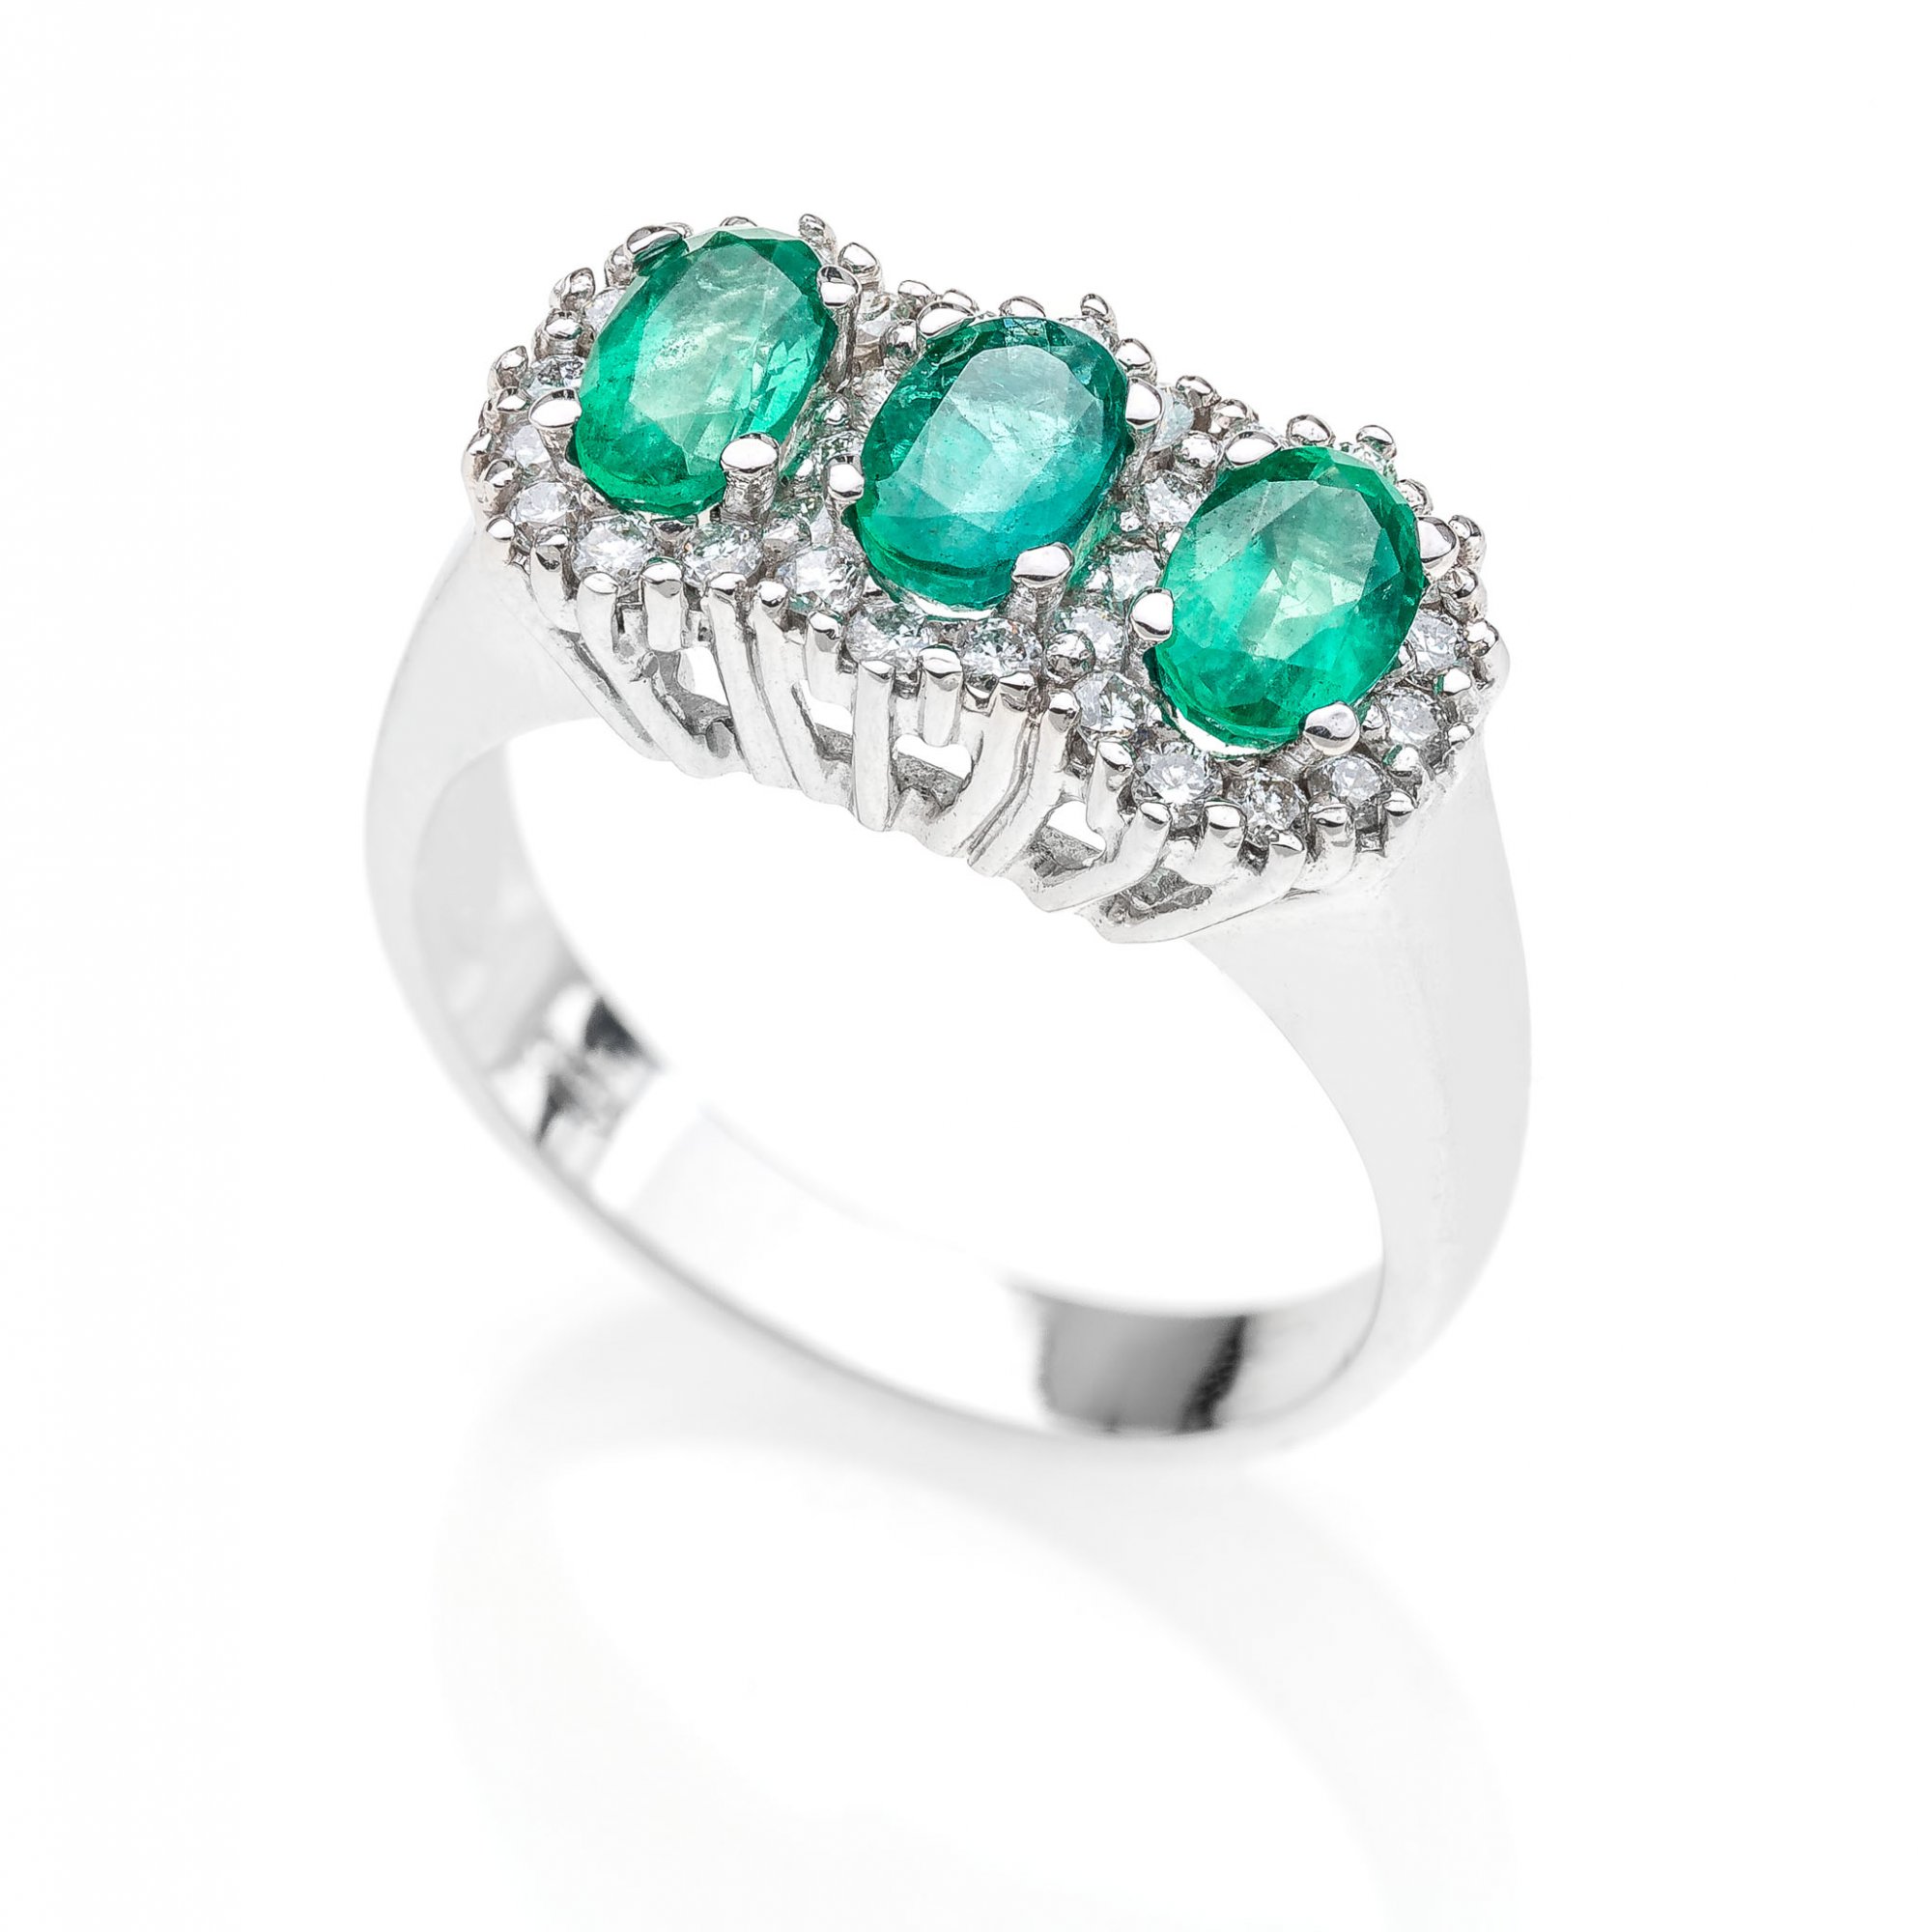 18 KT white gold ring with natural Columbia Emeralds and natural round brilliant cut diamonds